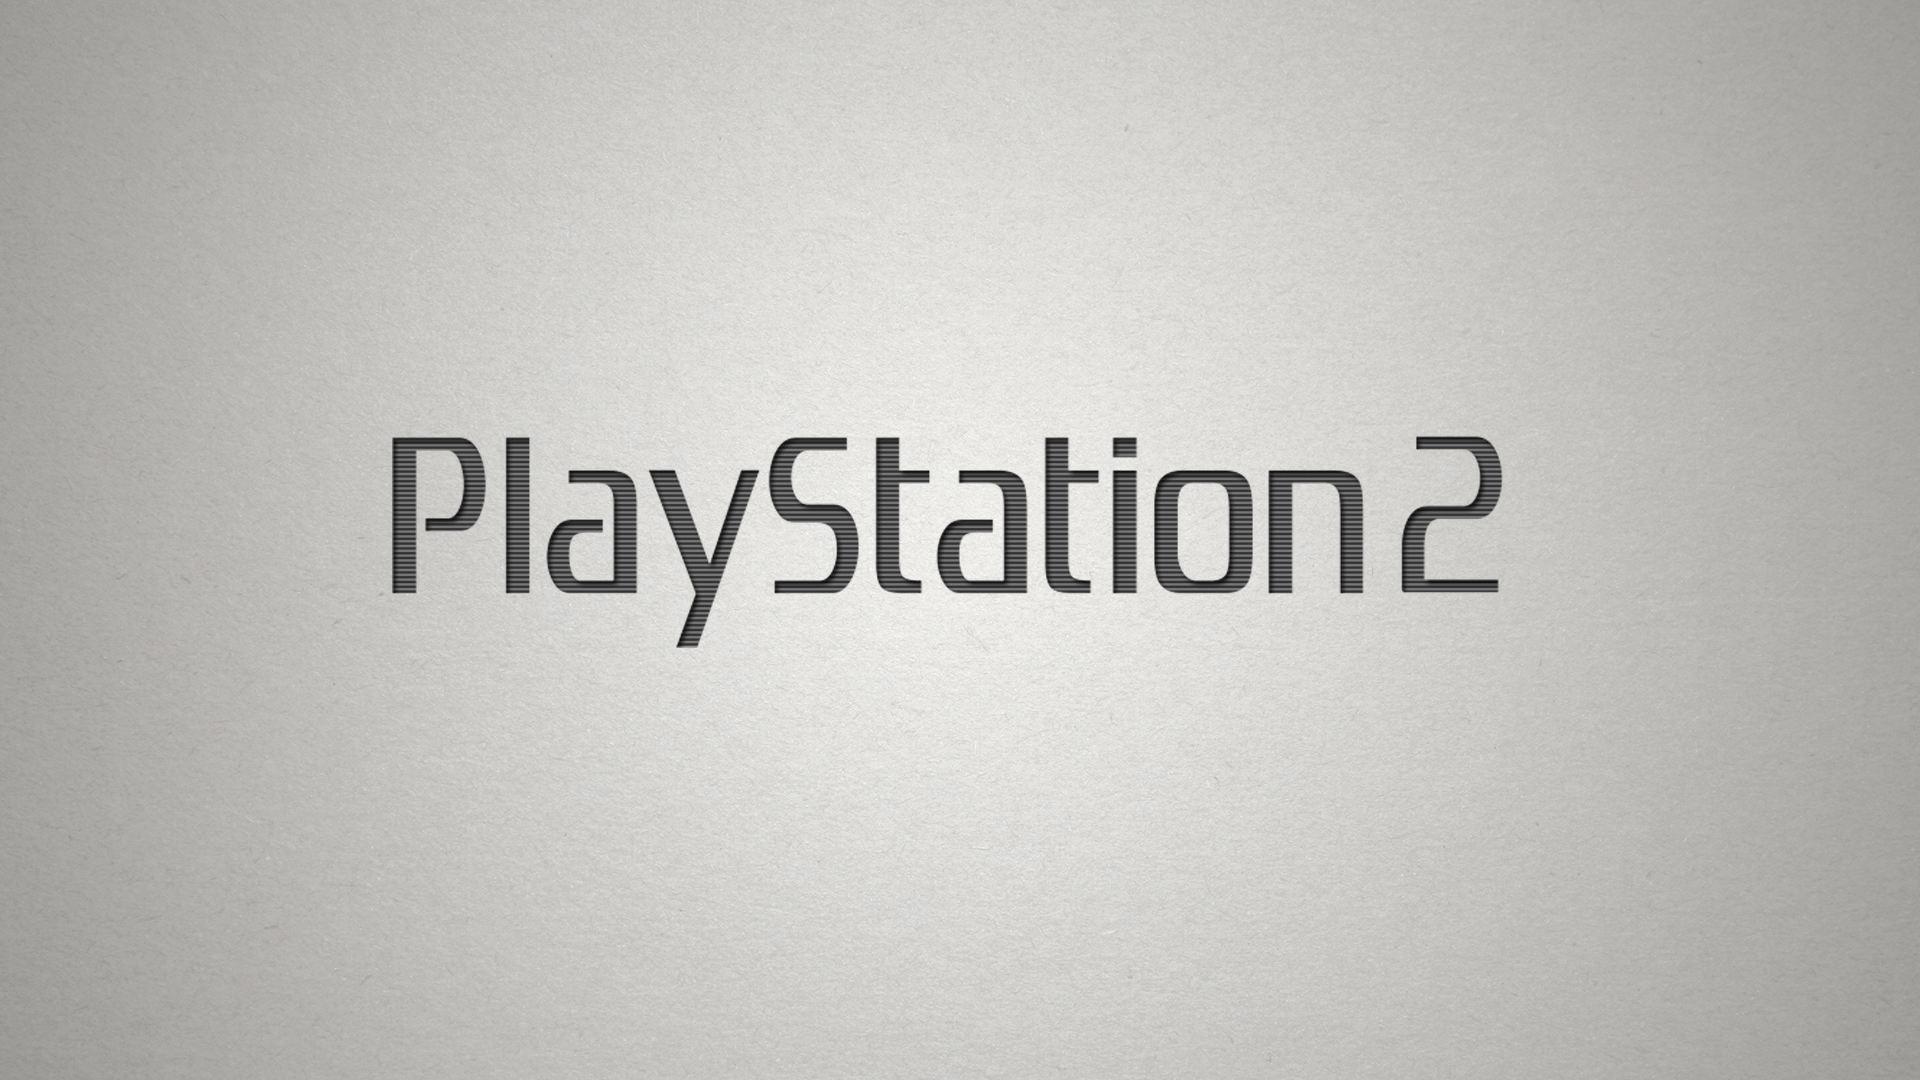 Playstation 2 Full HD Wallpaper and Backgroundx1080